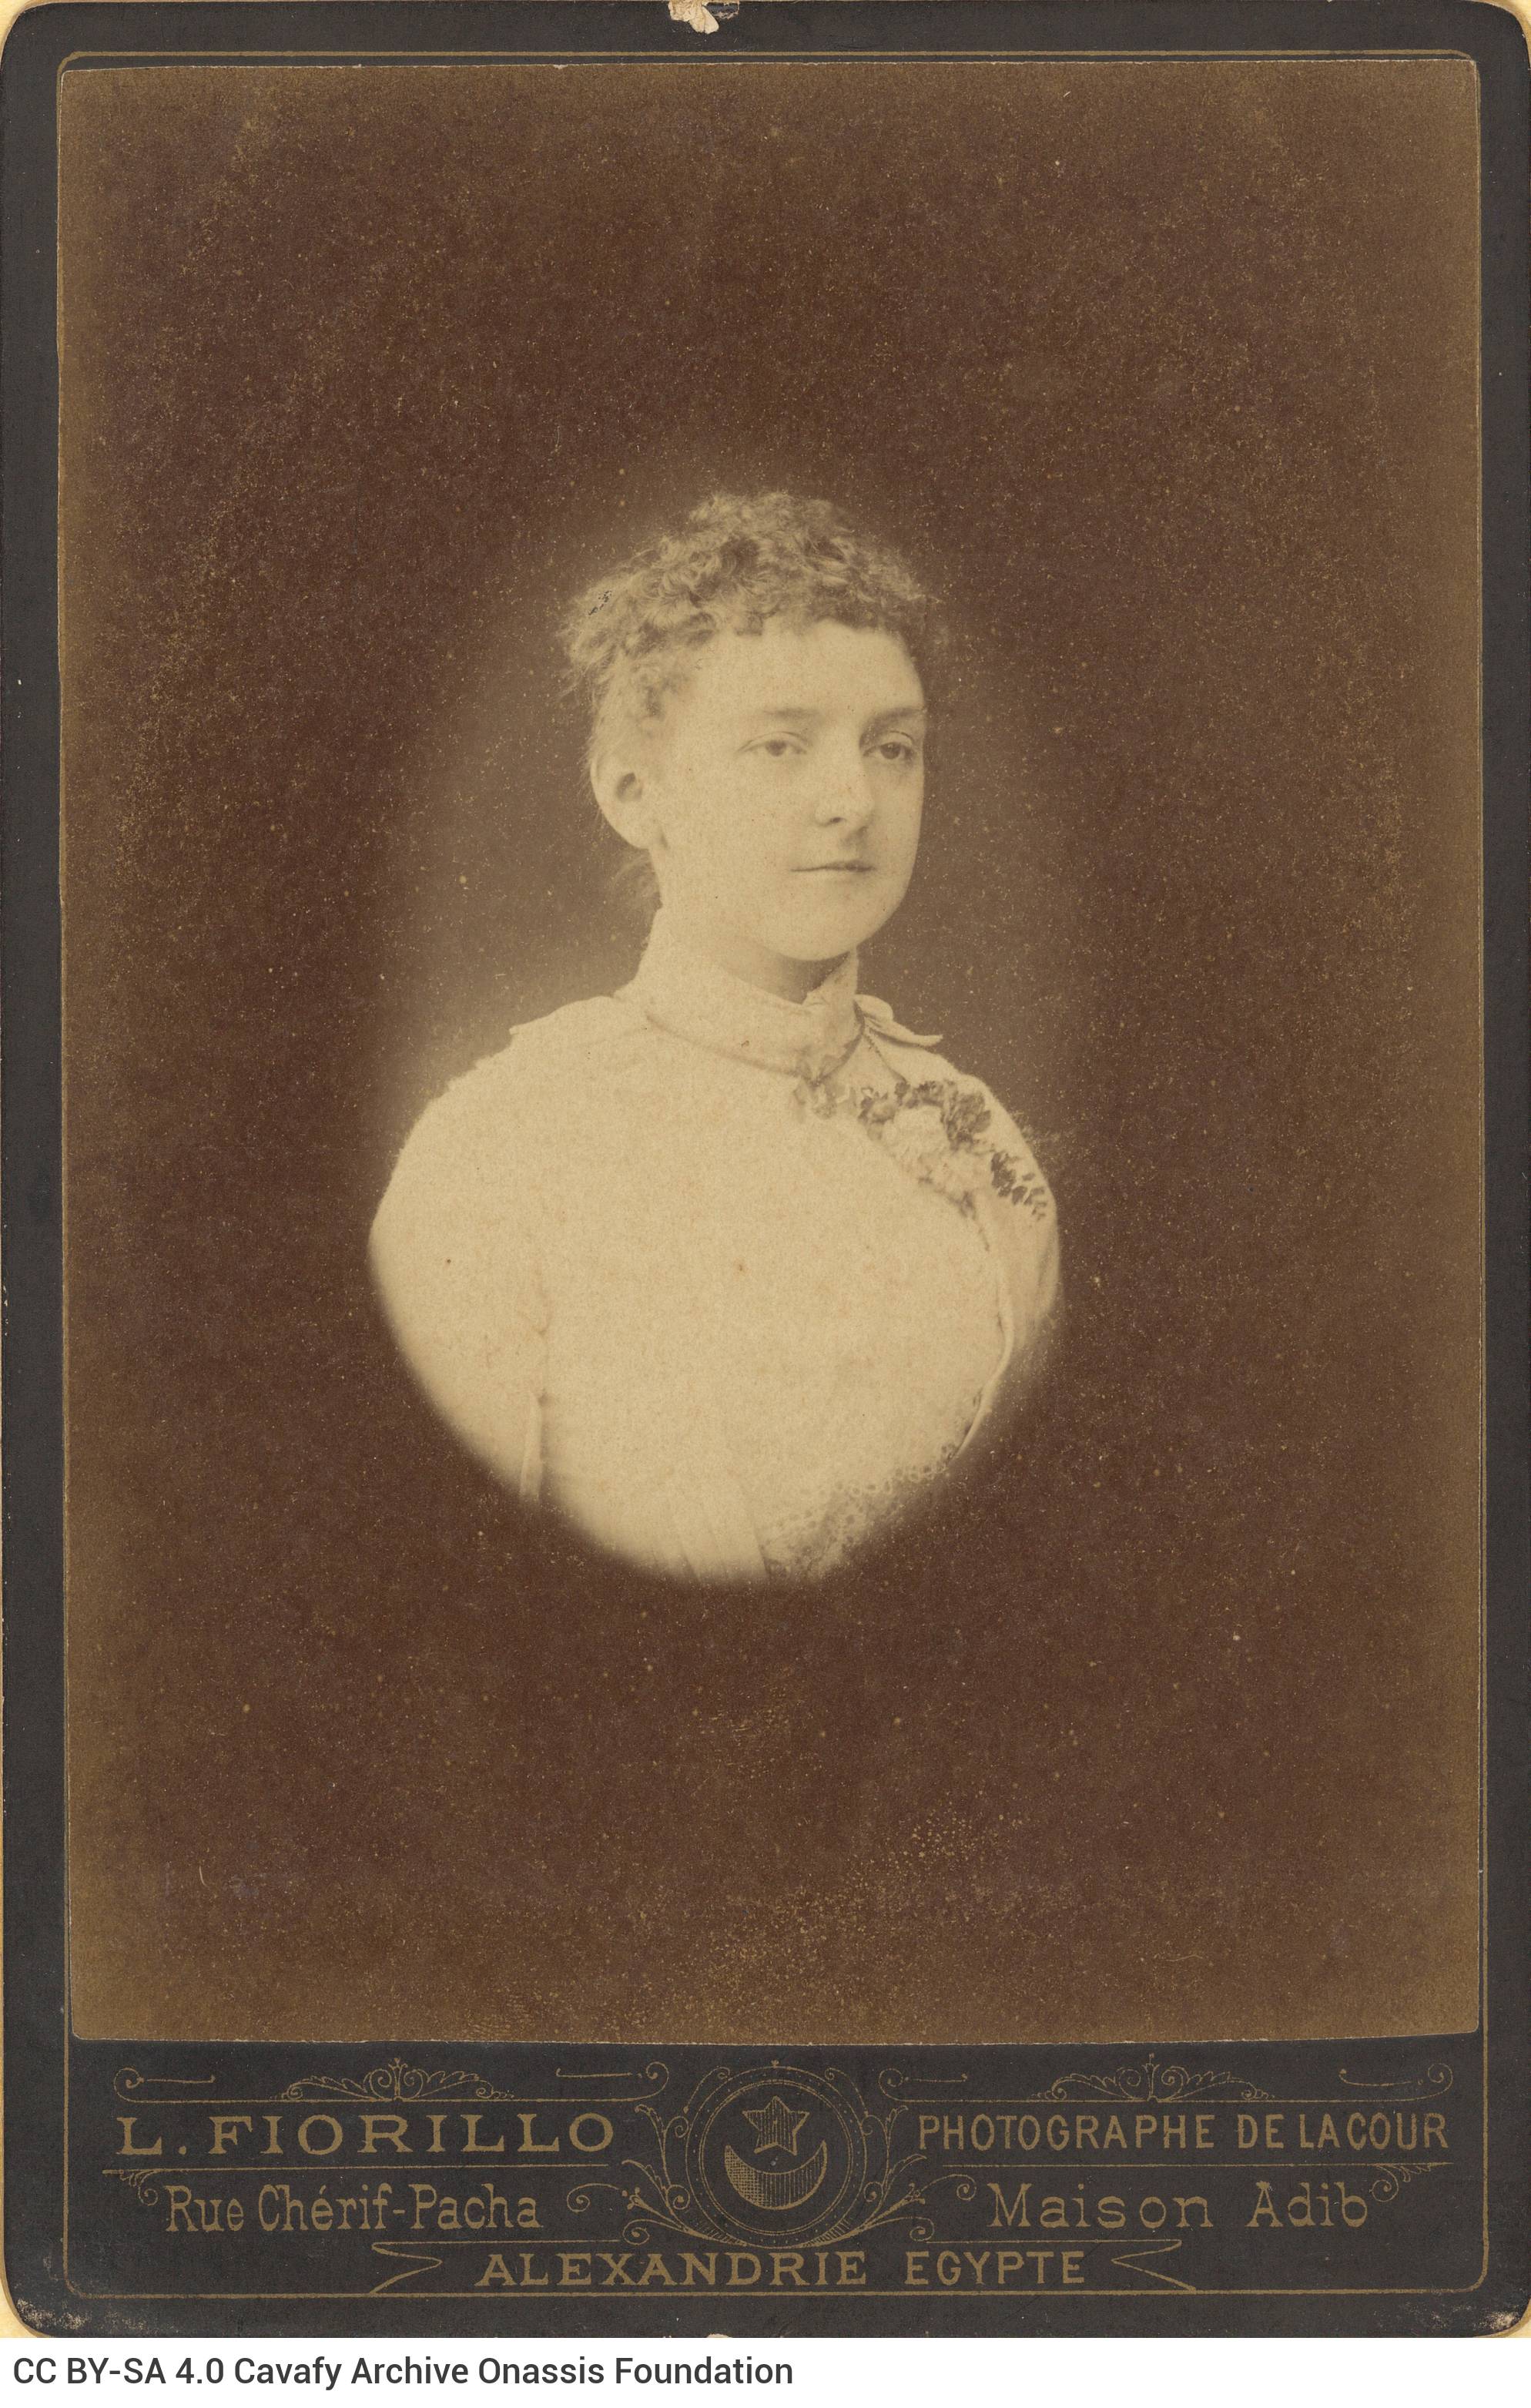 Photographic portrait of a young woman wearing a shirt, from the photo shop L. Fiorillo of Alexandria. The logo of the photo 